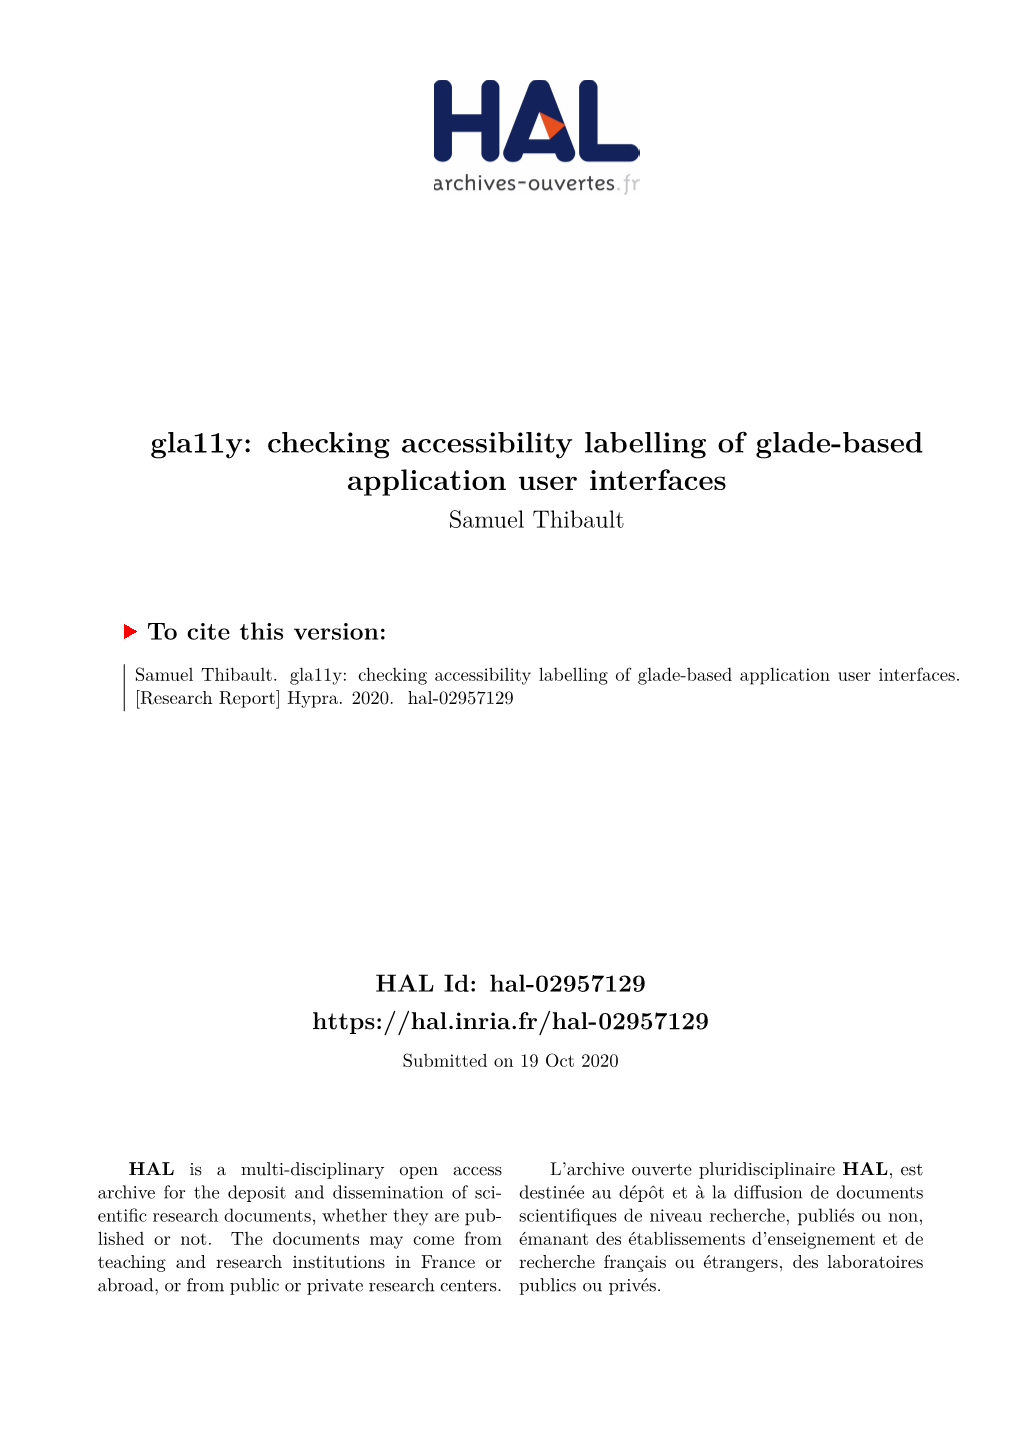 Checking Accessibility Labelling of Glade-Based Application User Interfaces Samuel Thibault